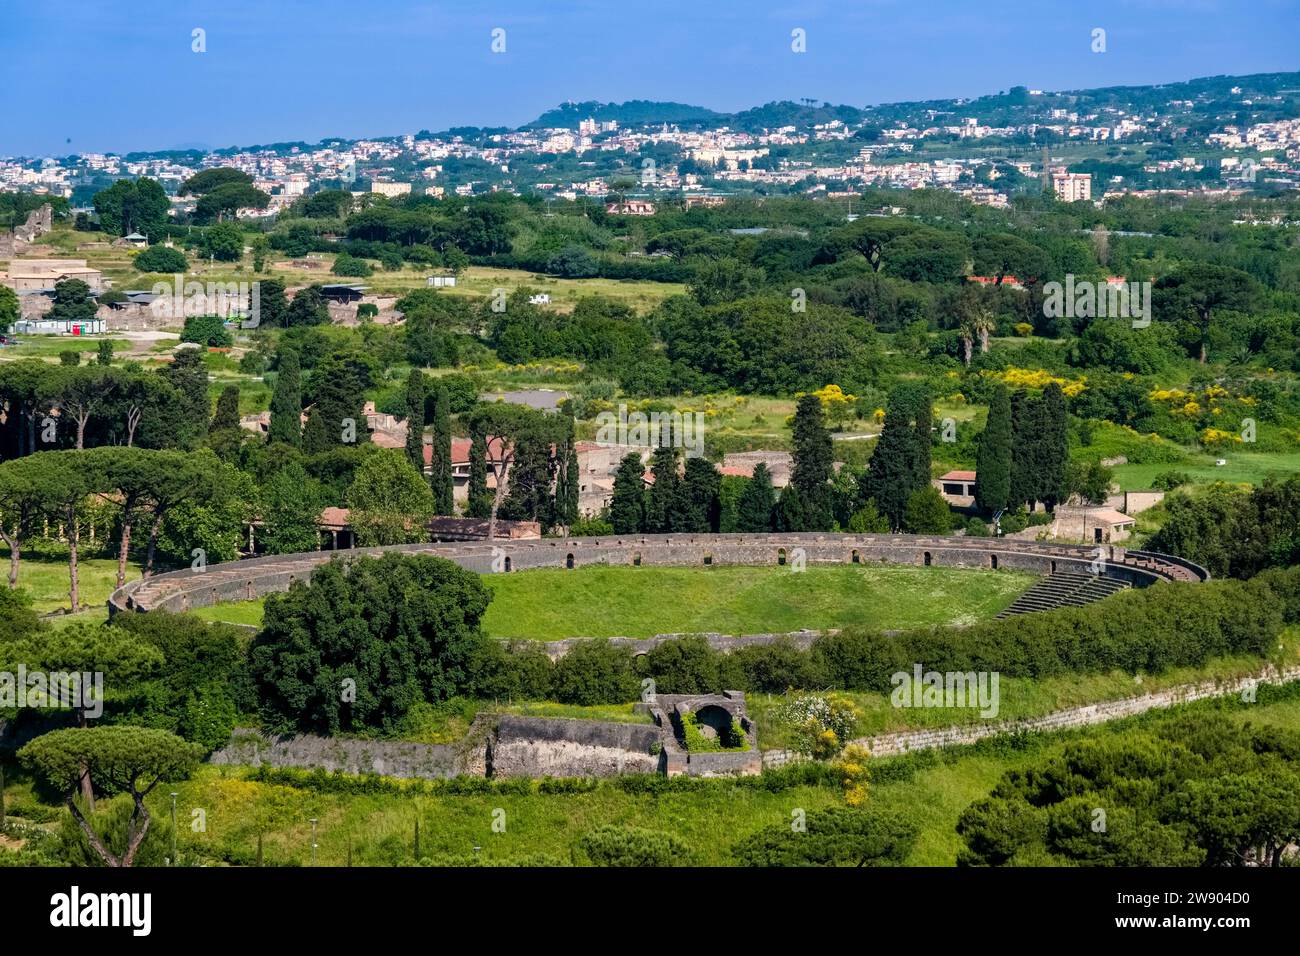 Aerial view of the archaeological site of Pompeii, seen from the bell tower of the church Santuario della Beata Vergine del Santo Rosario. Stock Photo